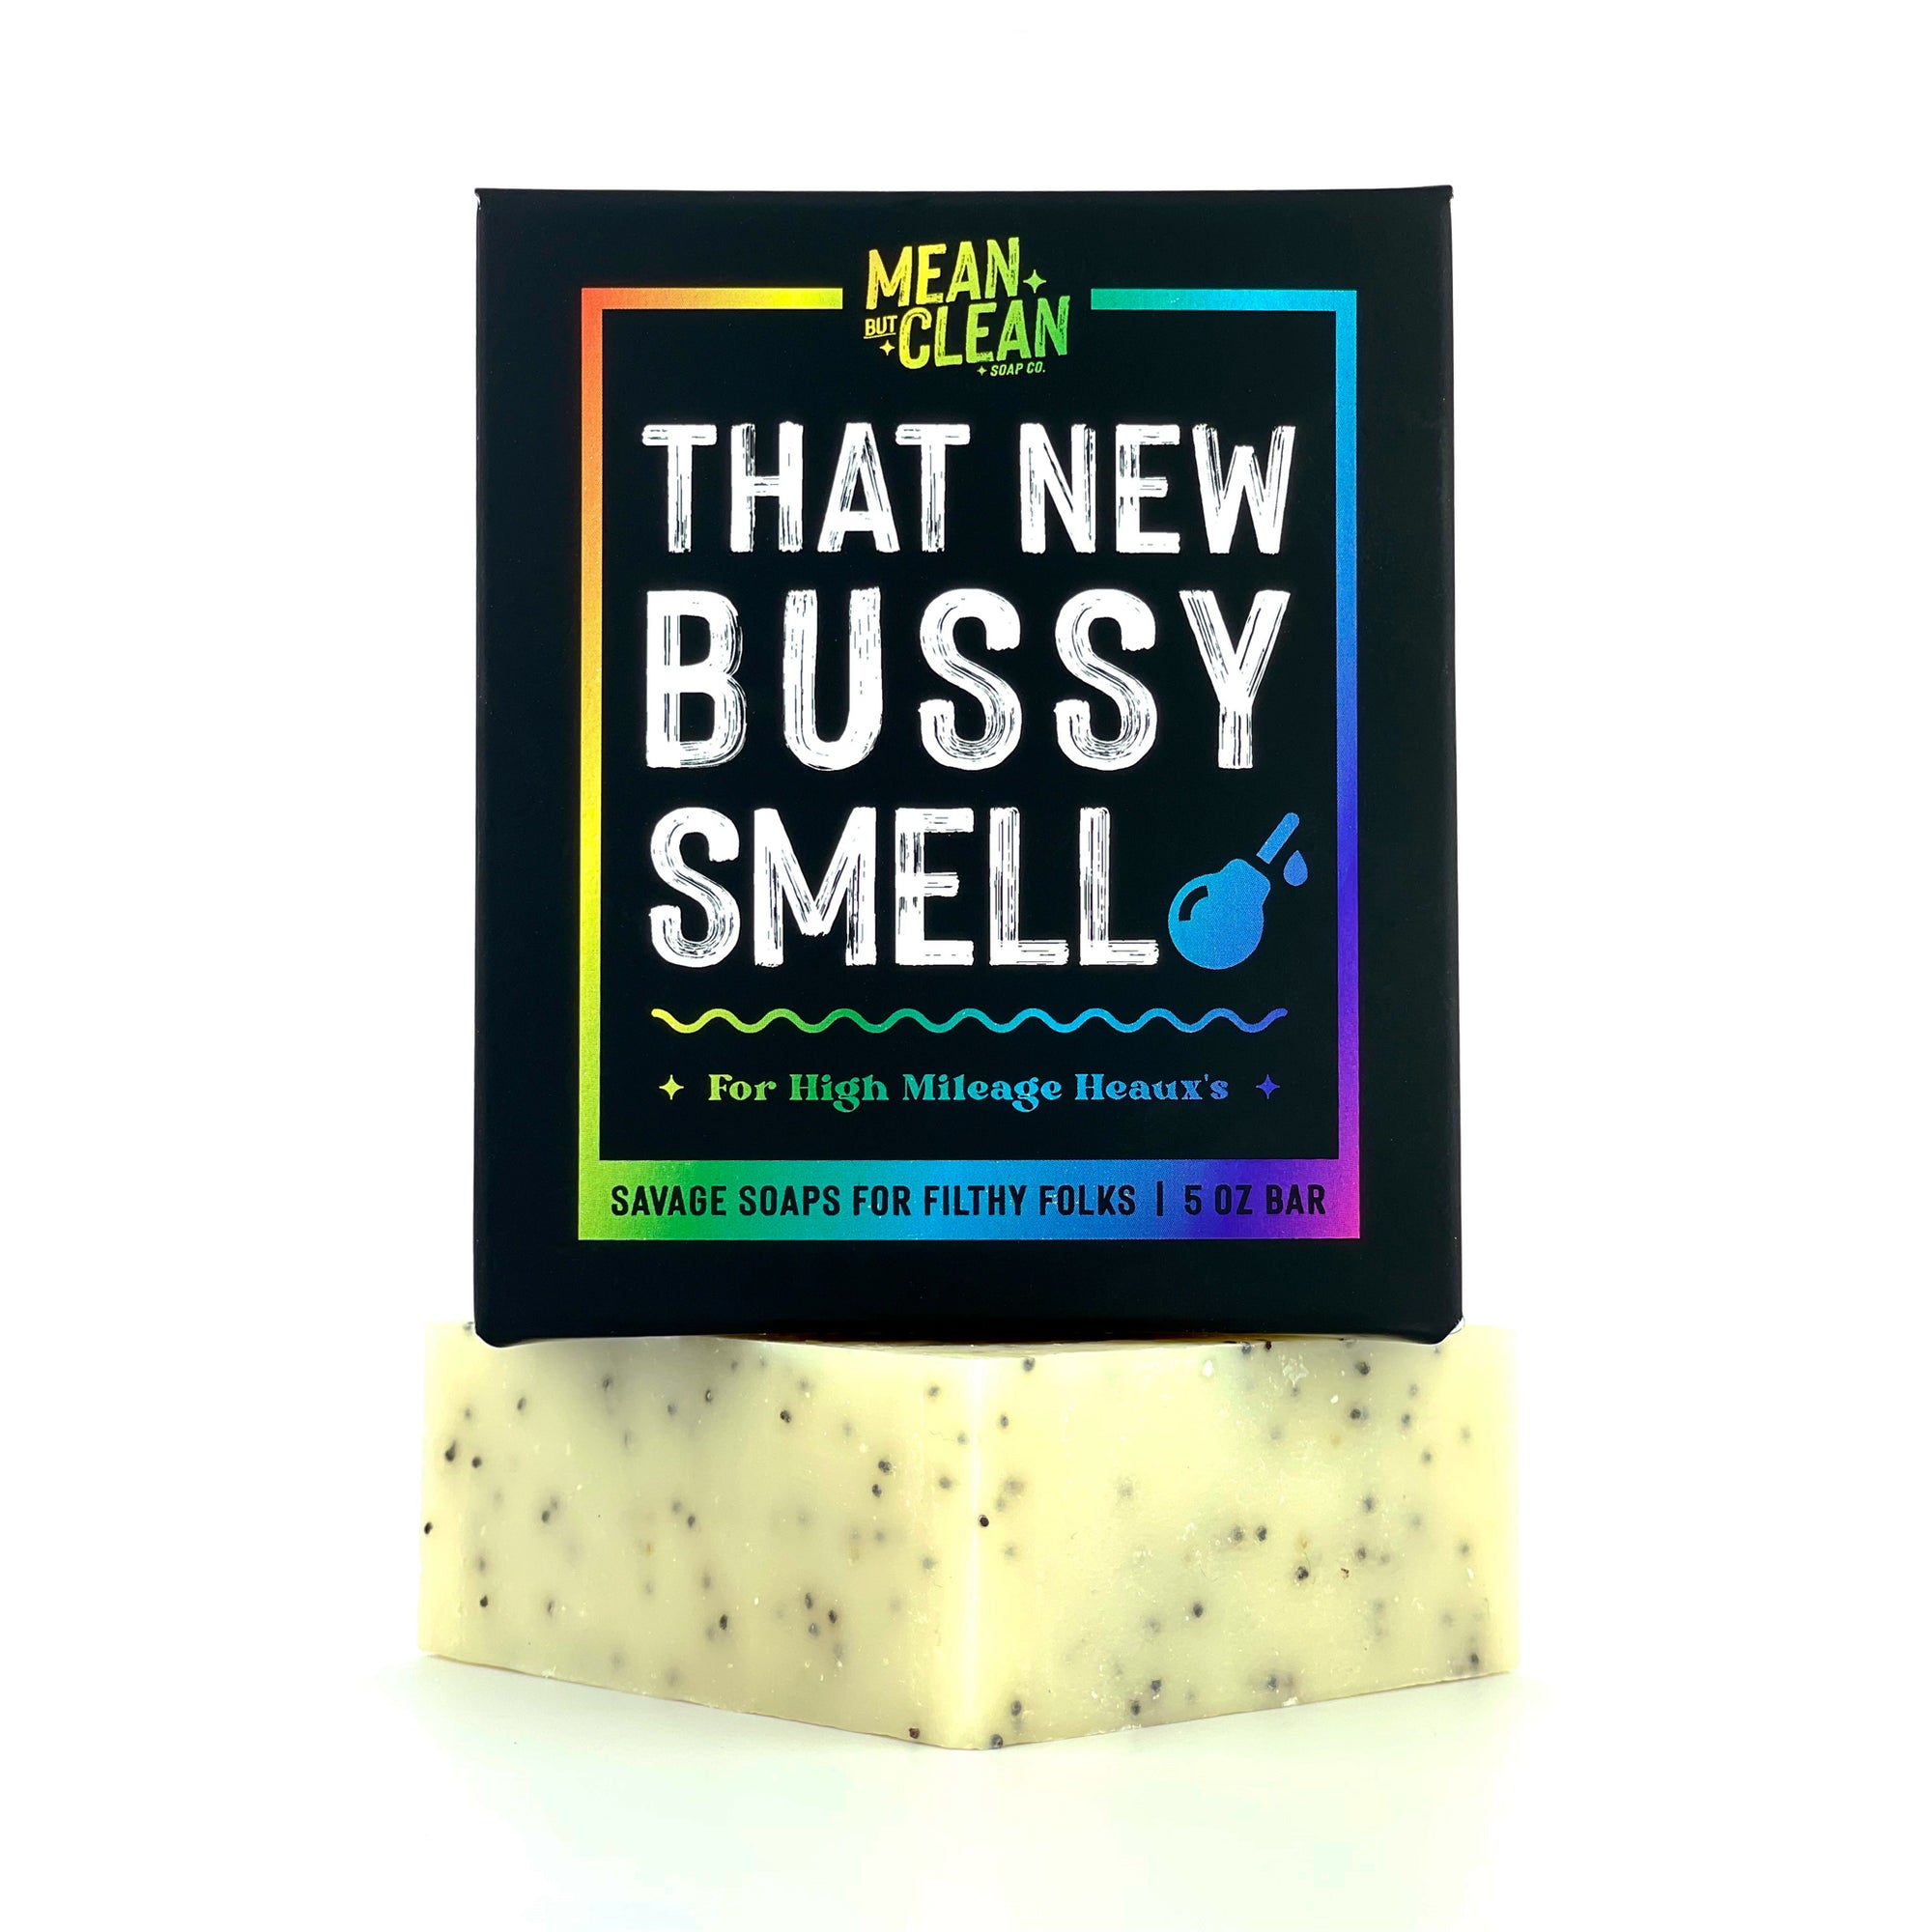 That New Bussy Smell Peppermint Poppy Soap Gag Gift Soap Natural Handmade Soap Cold Processed Soap Funny Gag Gift For Friends